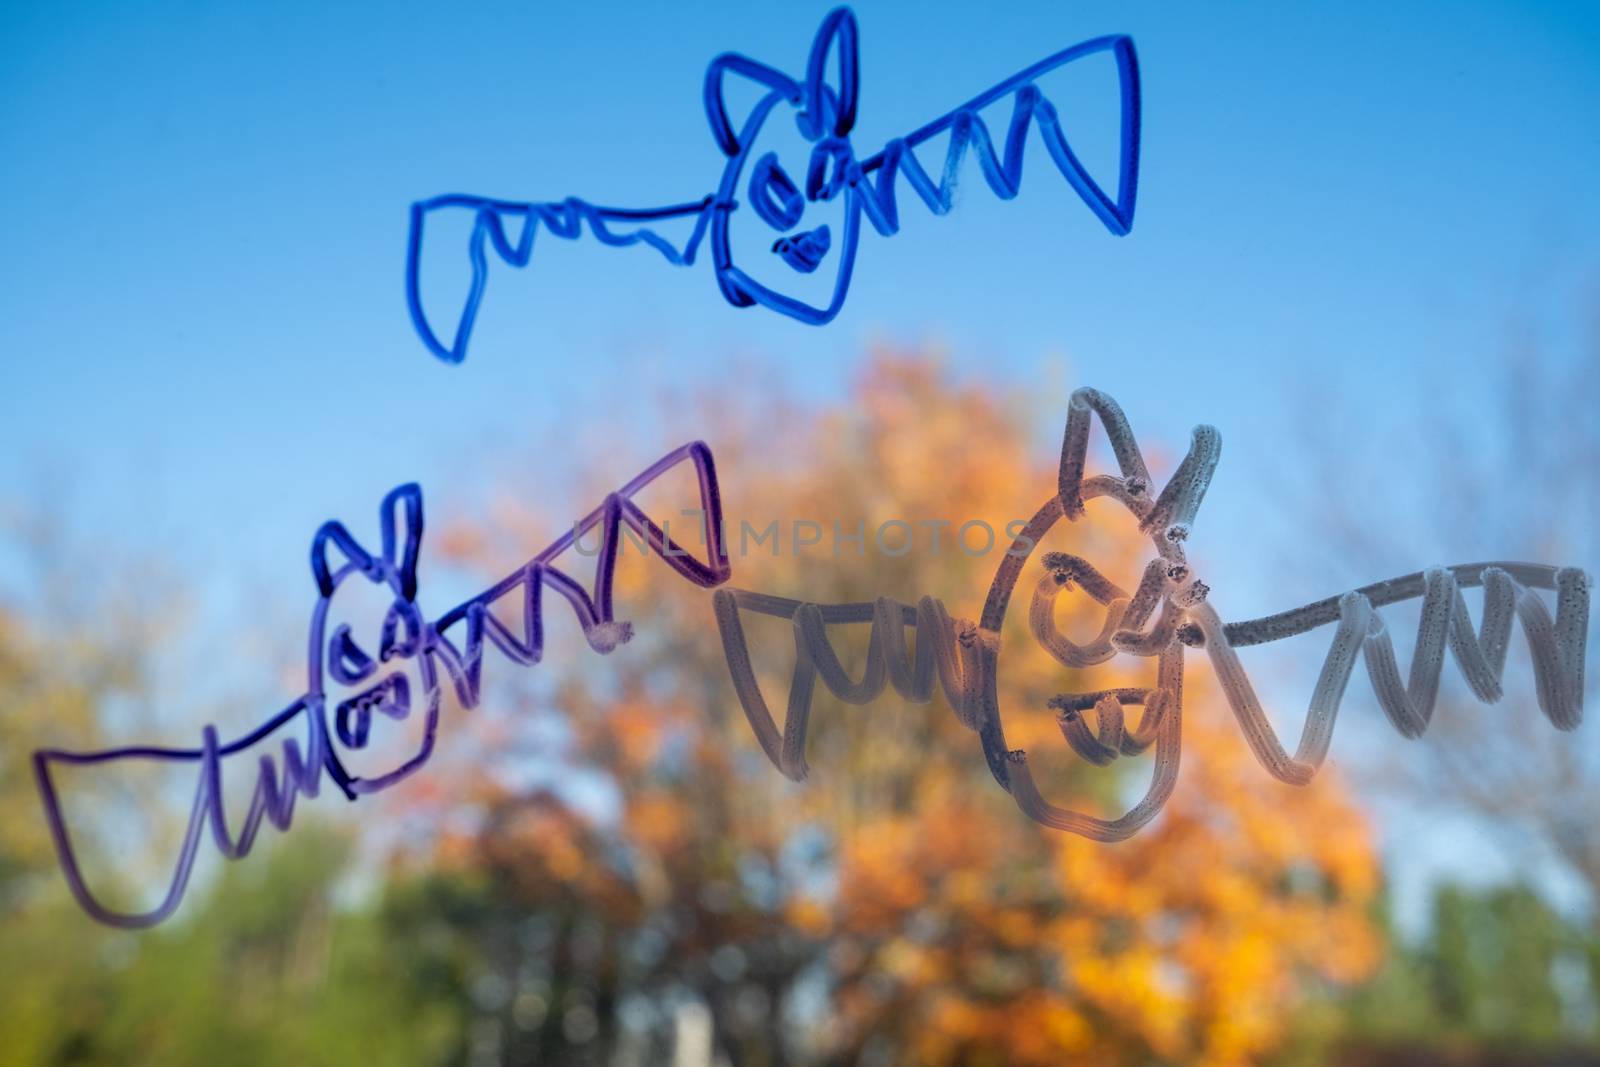 Indoor Halloween: child's bat drawings on window by colintemple